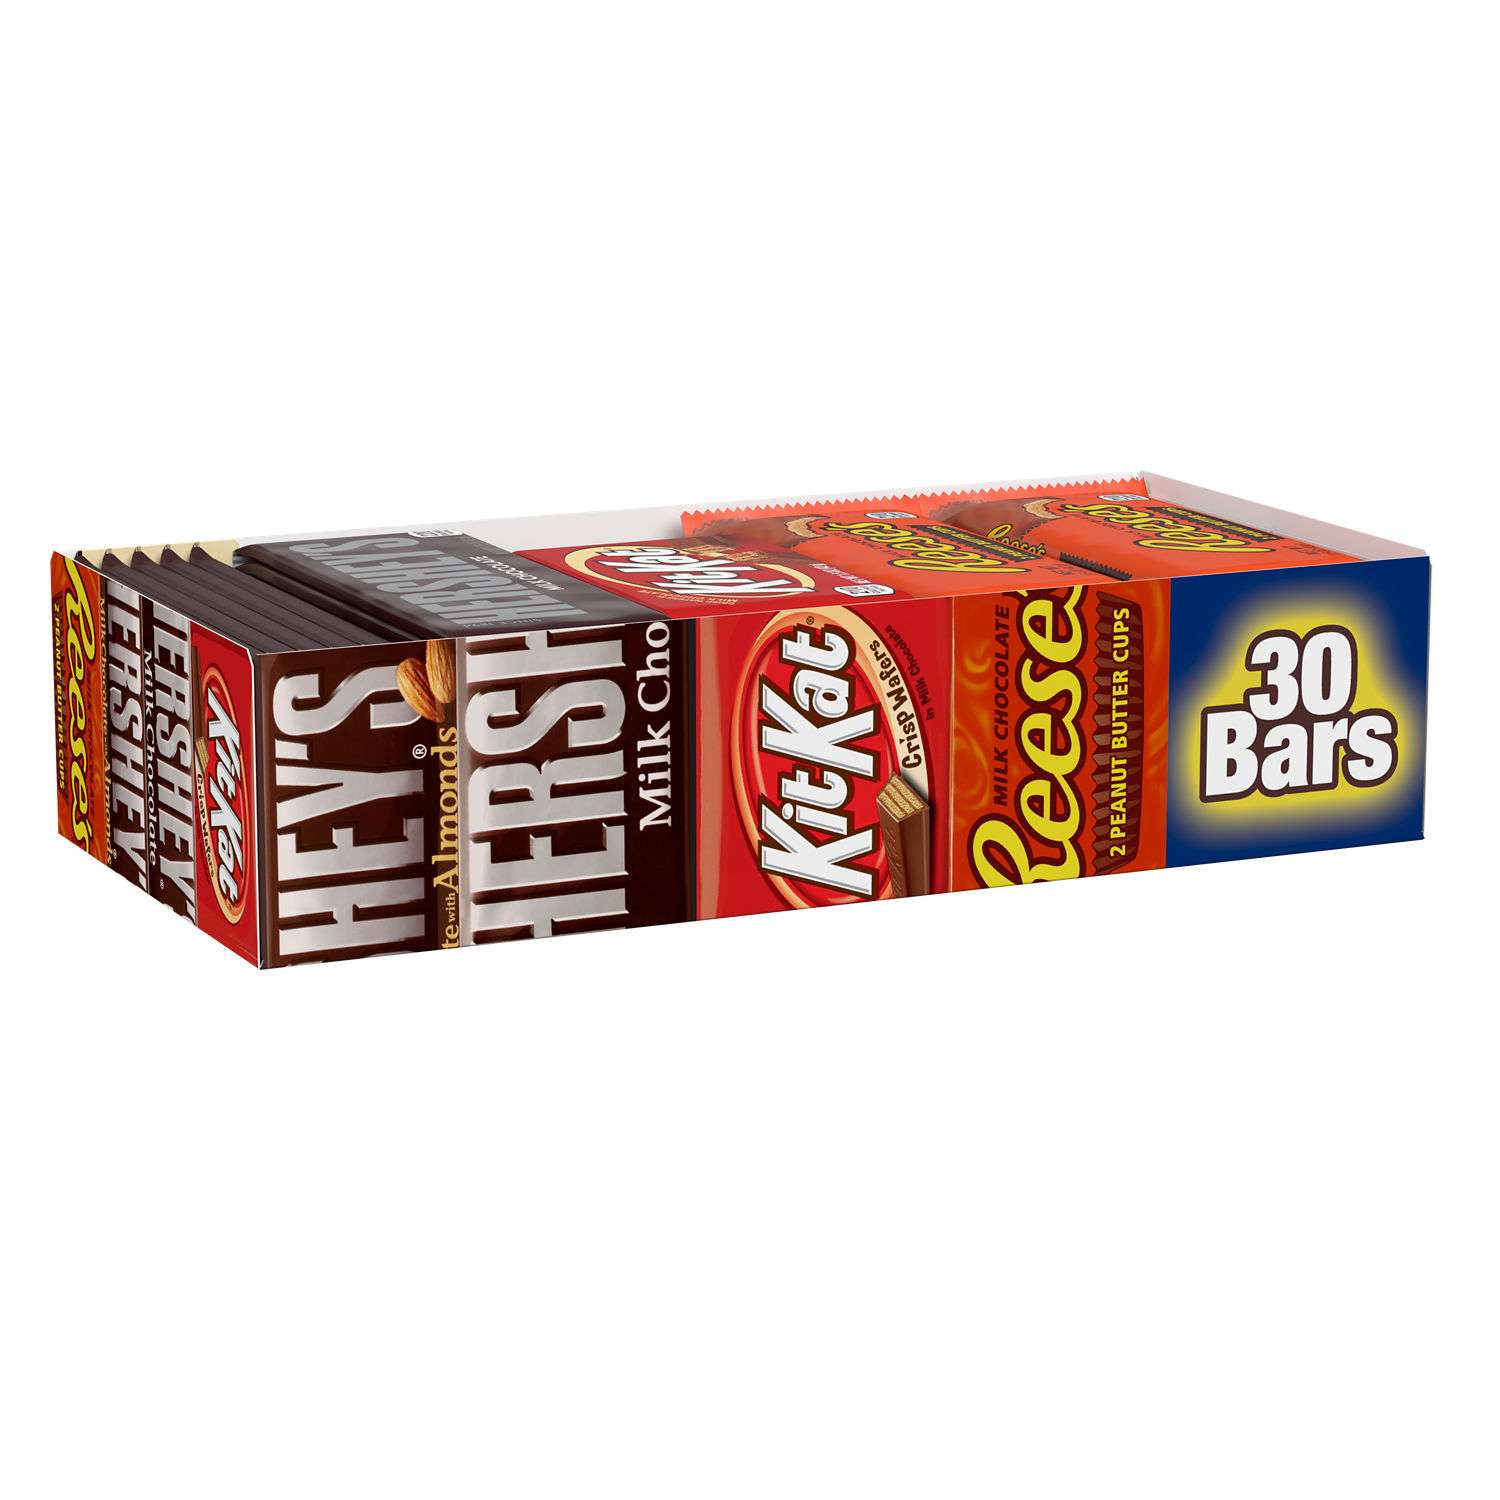 HERSHEY'S Favorite Standard Size Variety Pack 18 Candy Bars